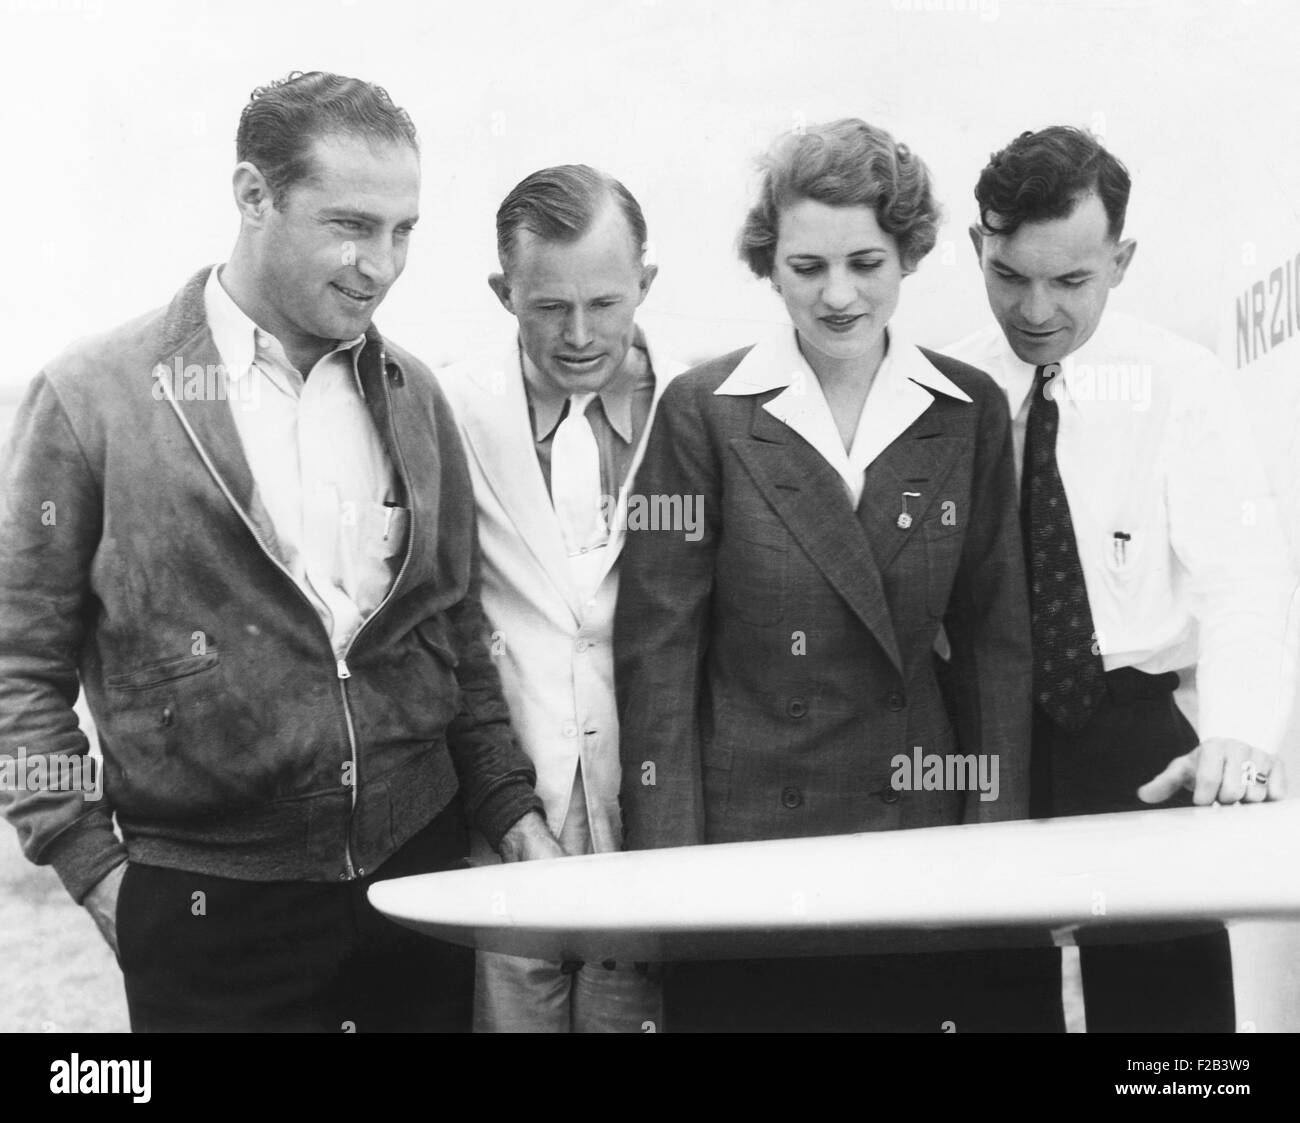 Pilots flying the 1935 Bendix Air Race from Burbank, California, to Cleveland, Ohio. L-R: Cecil Allen, Roy Hunt, Jacqueline Cochran, Royal Leonard. Ca. August 28, 1935. Cecil Allen was killed during the race when his plane crashed in a potato field in the fog. Roy Hunt finished 4th, and Jackie Cochran finished 5th. Royal Leonard was forced down with engine trouble and did not complete the race. - (CSU 2015 5 34) Stock Photo